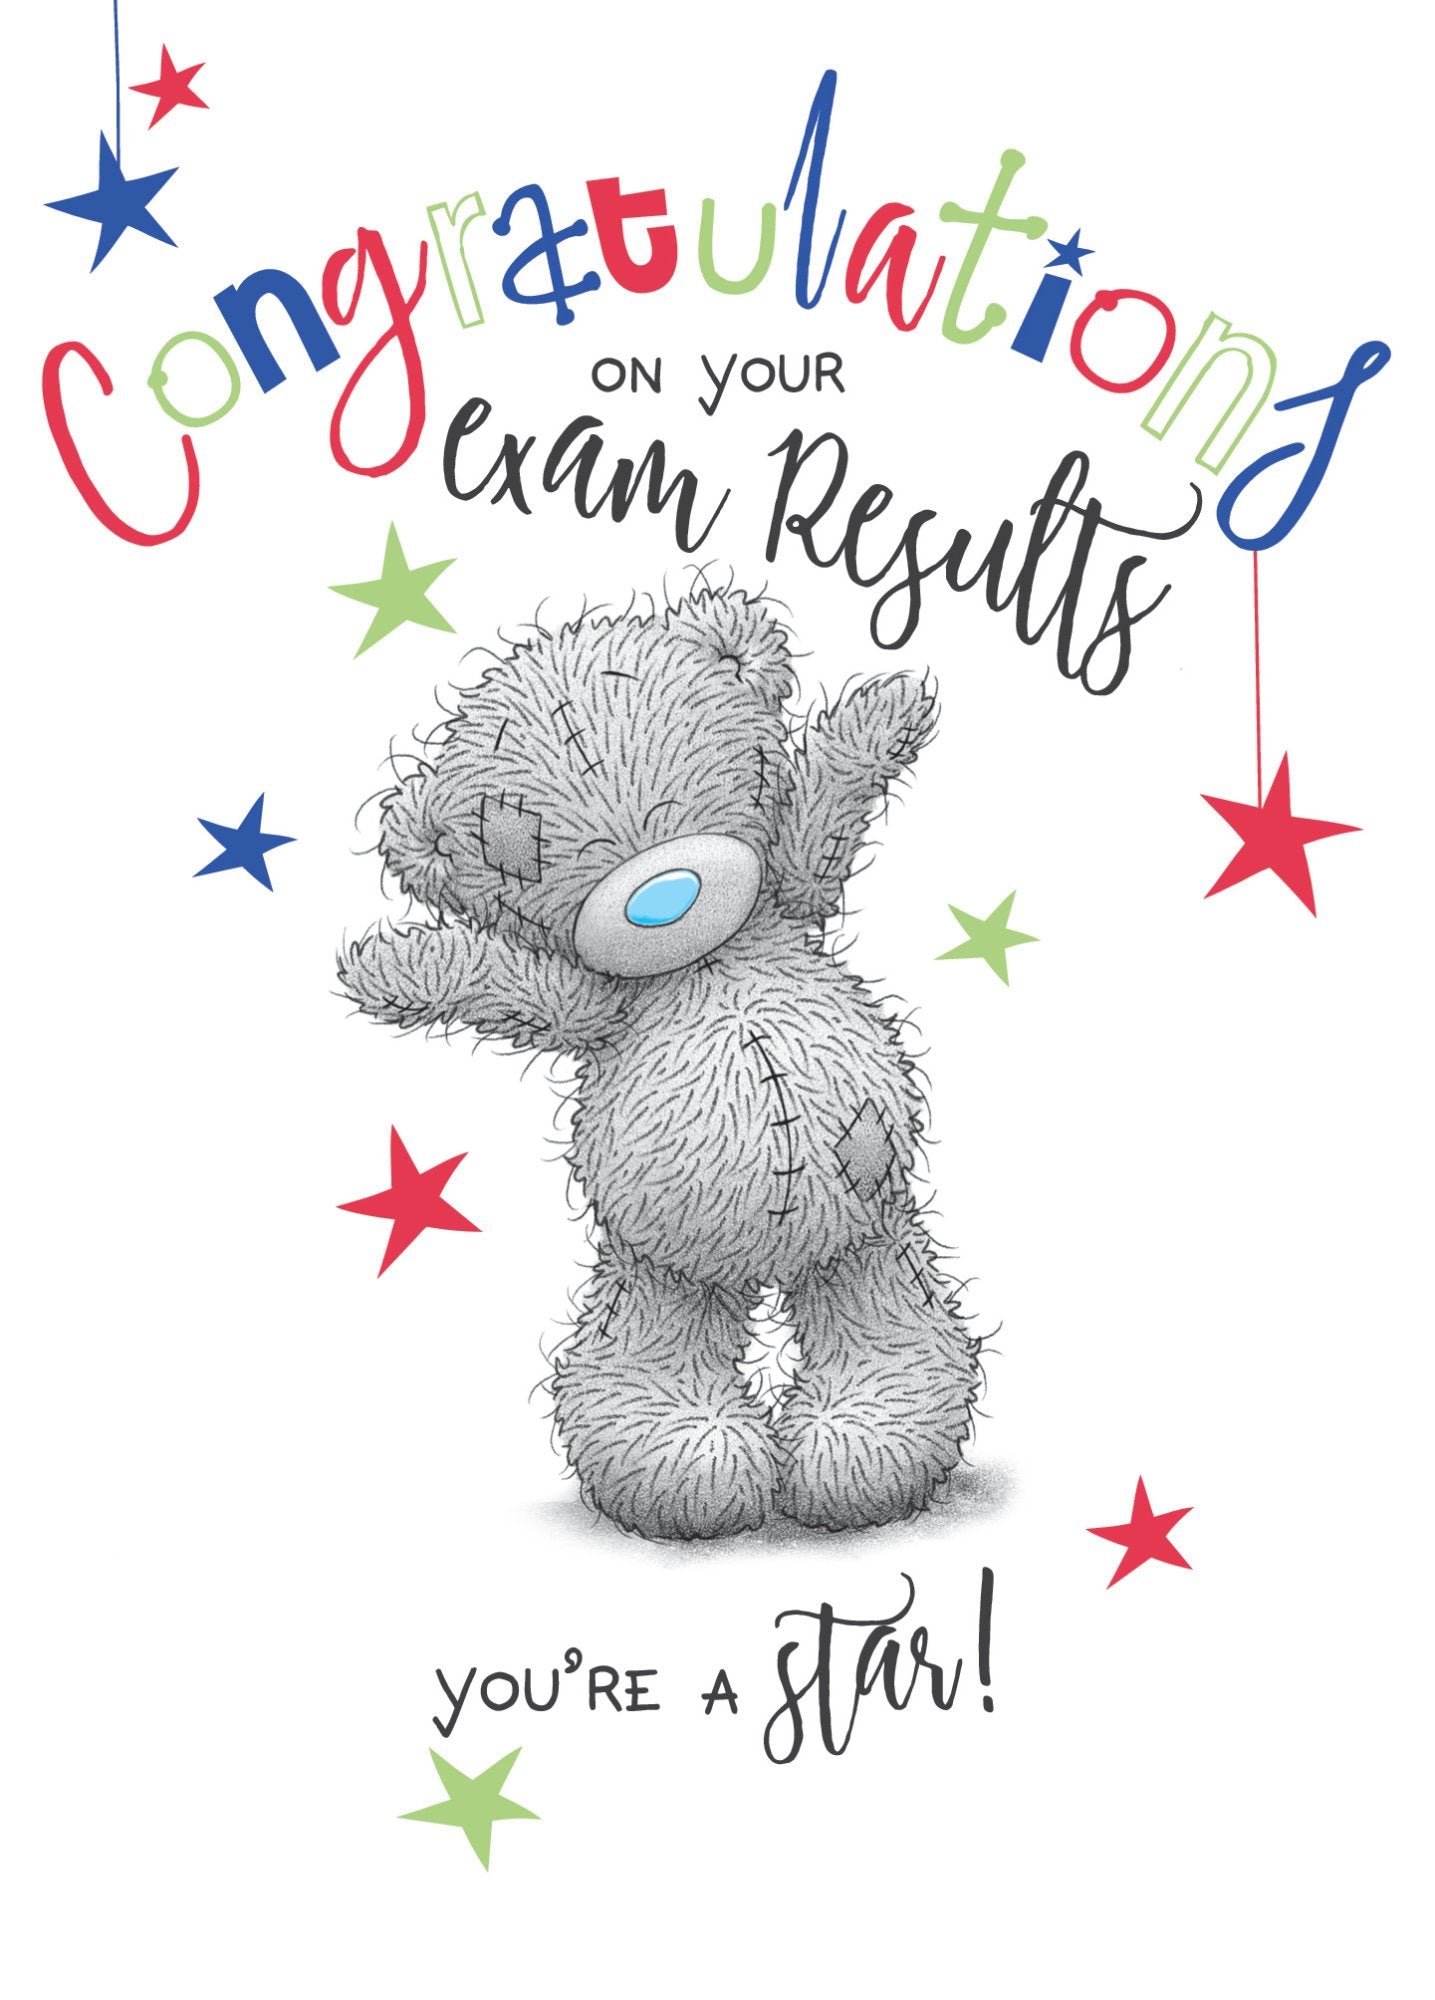 Photograph of Exam Congratulations Teddy Star Greetings Card at Nicole's Shop